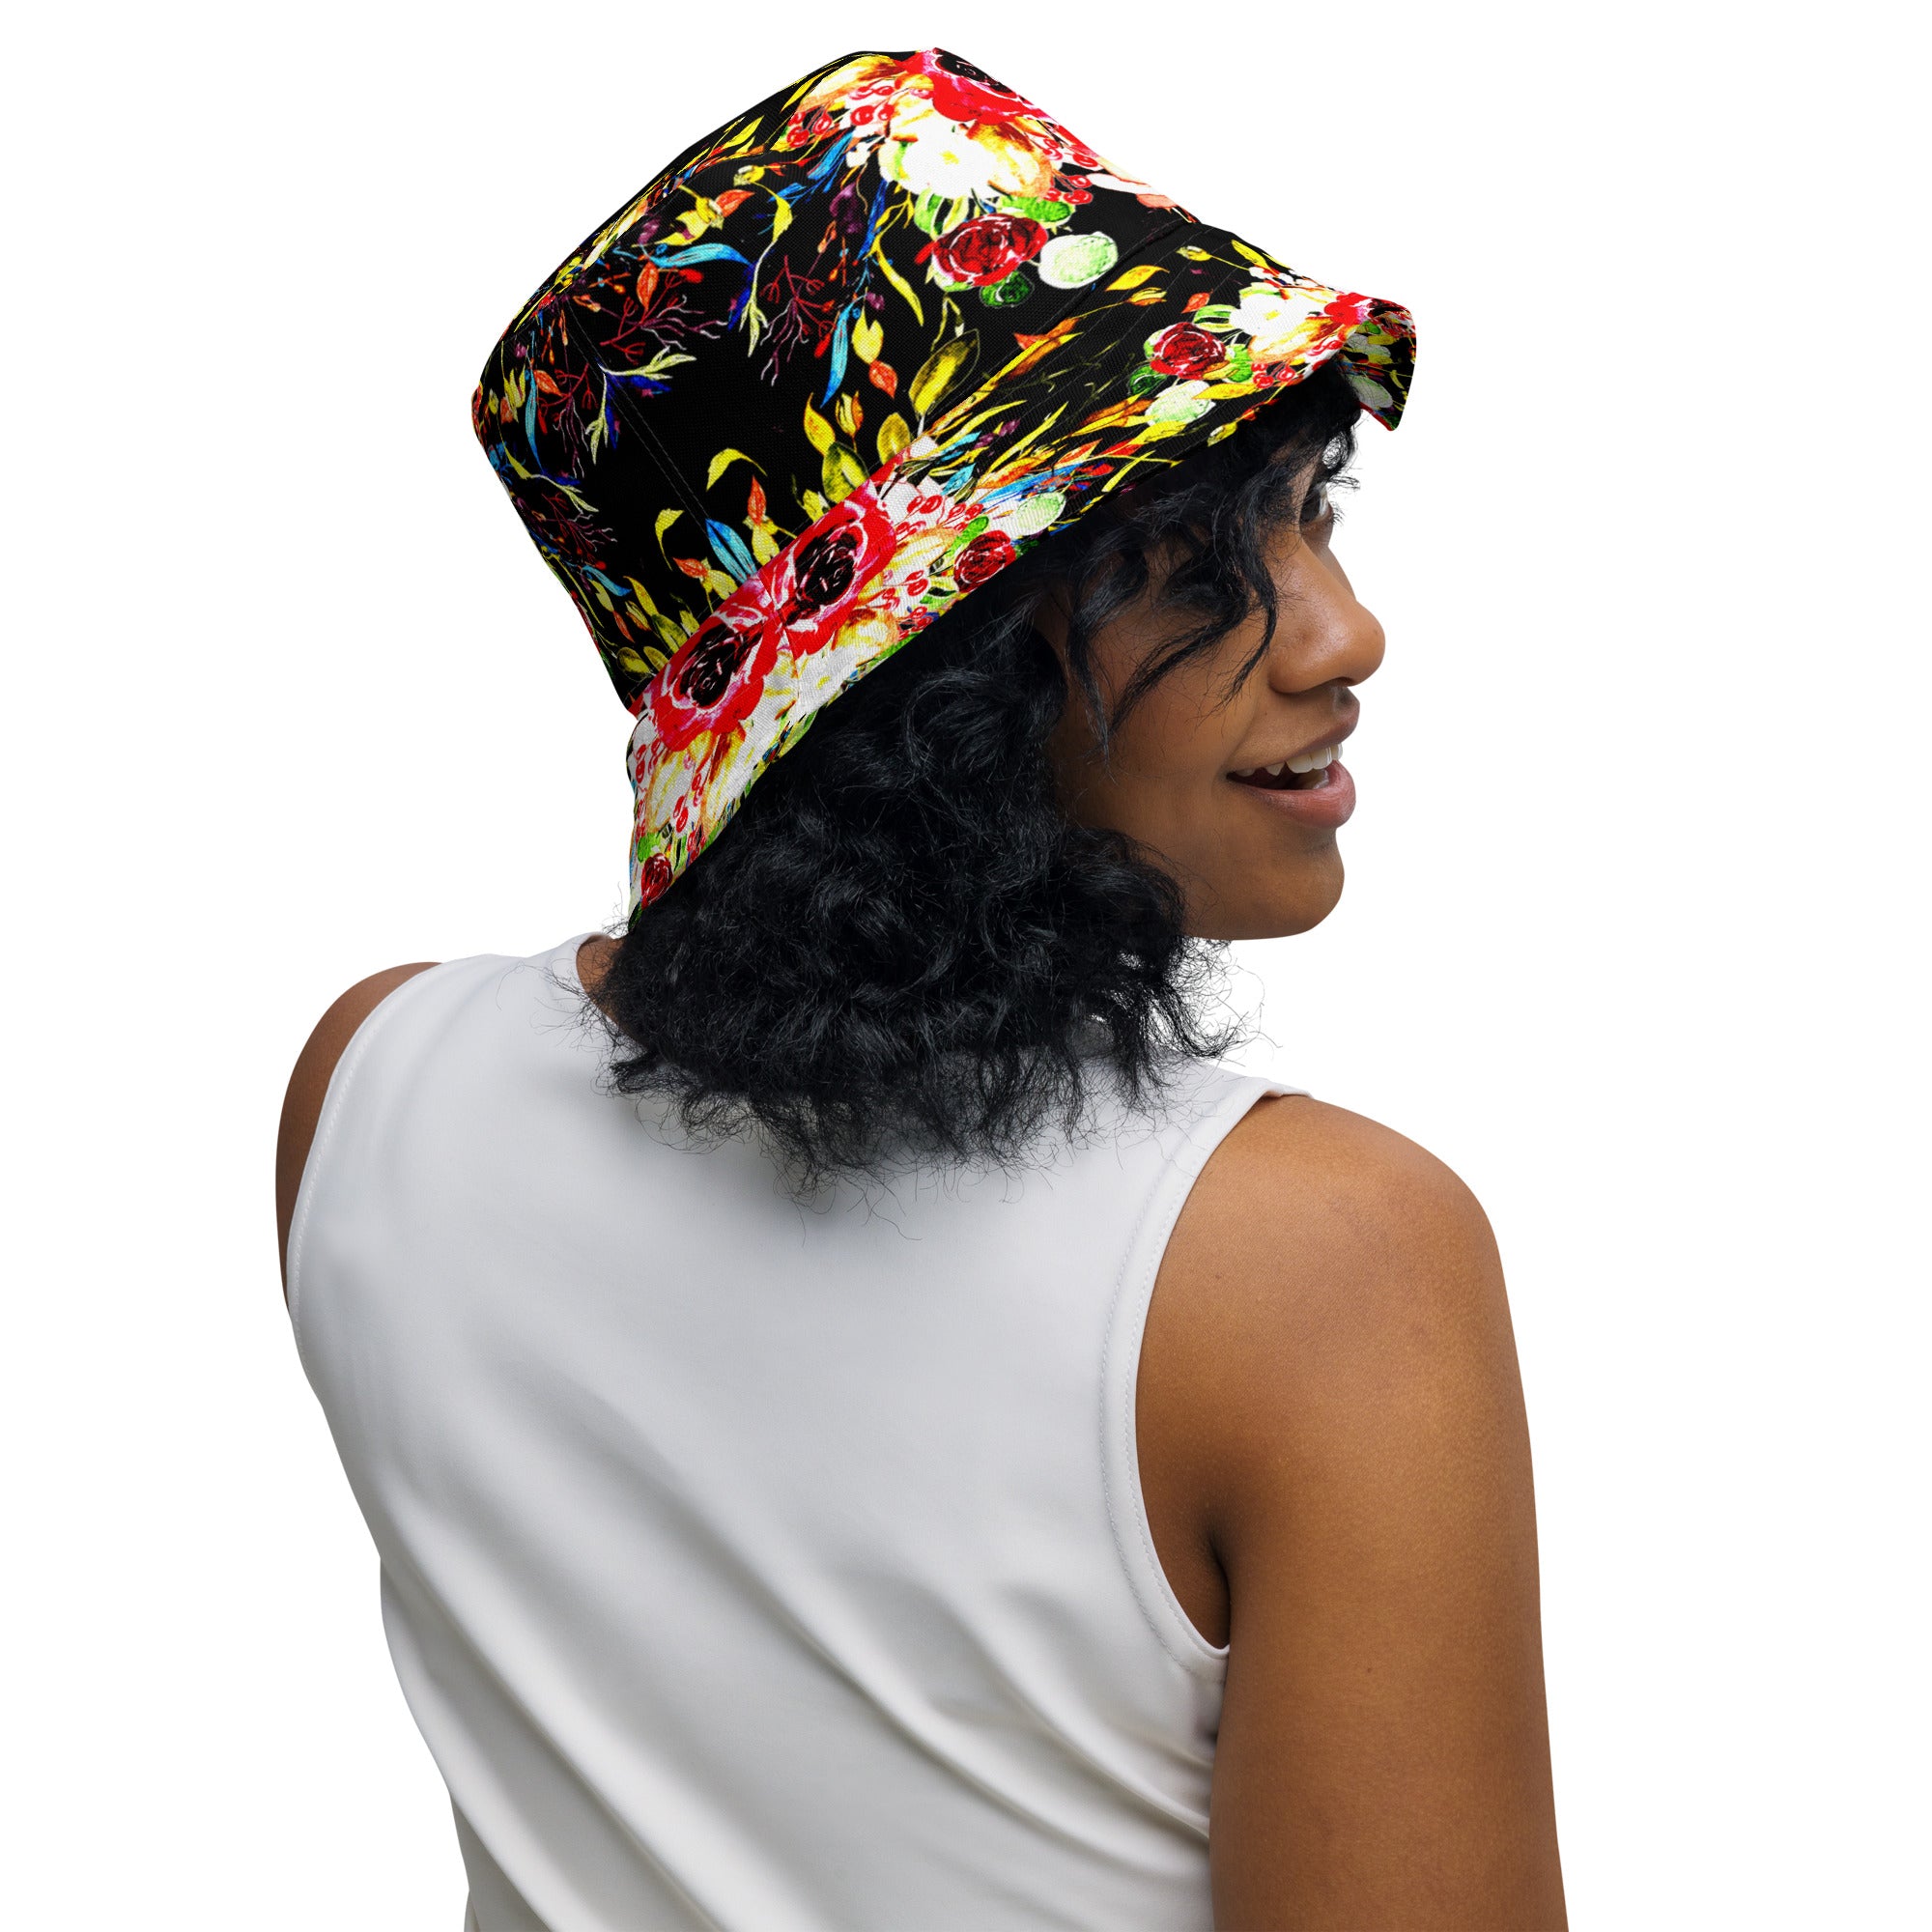 "Floral Finesse: The Essential Bucket Hat for Fashionistas", lioness-love